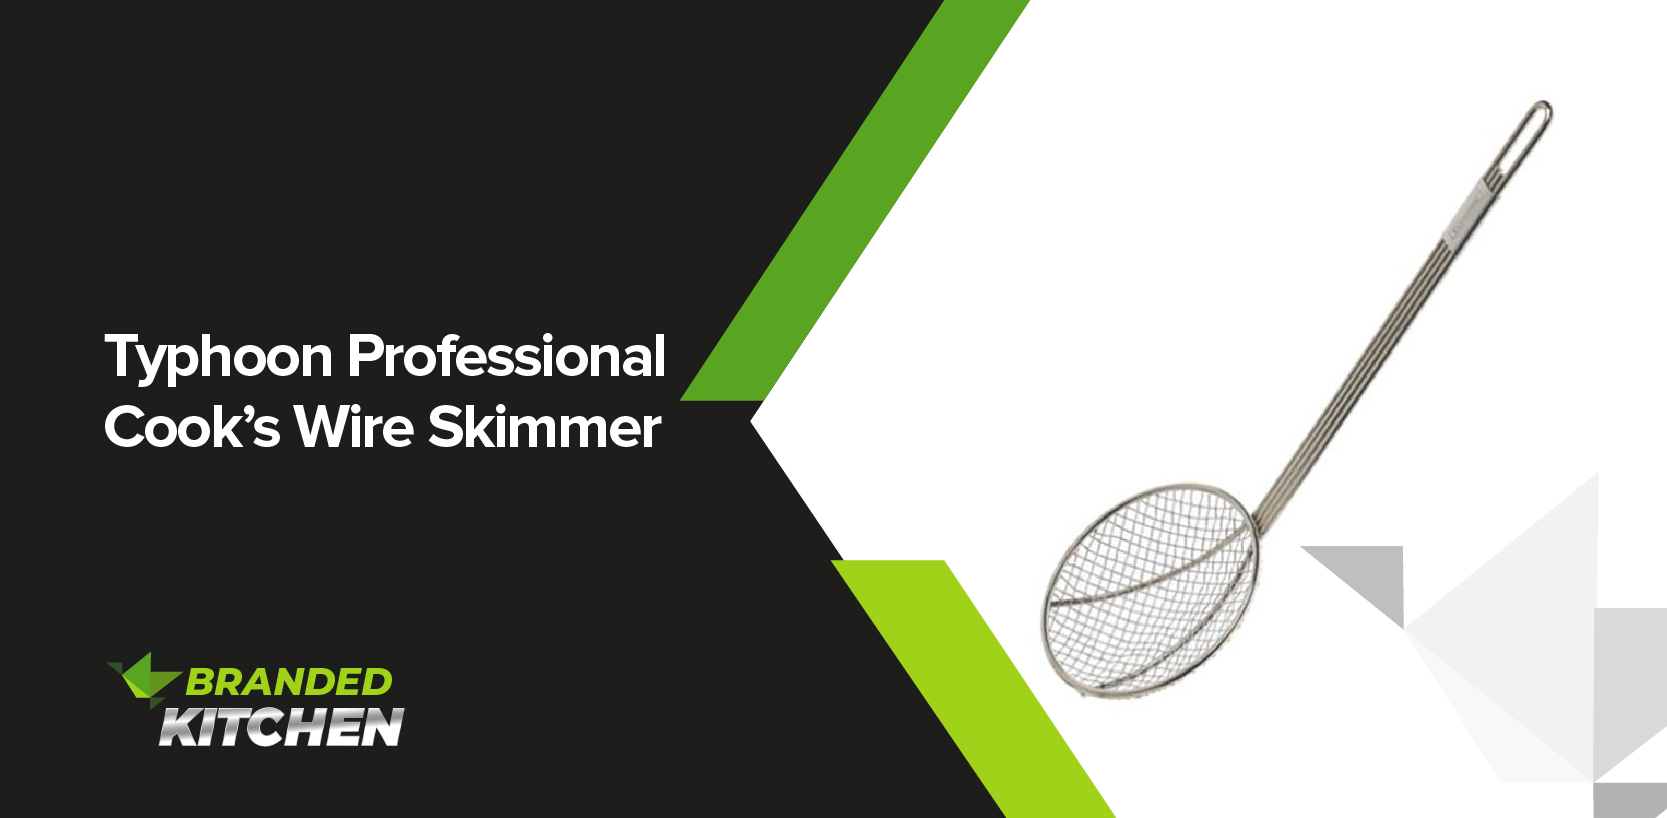 Typhoon Professional Cook’s Wire Skimmer